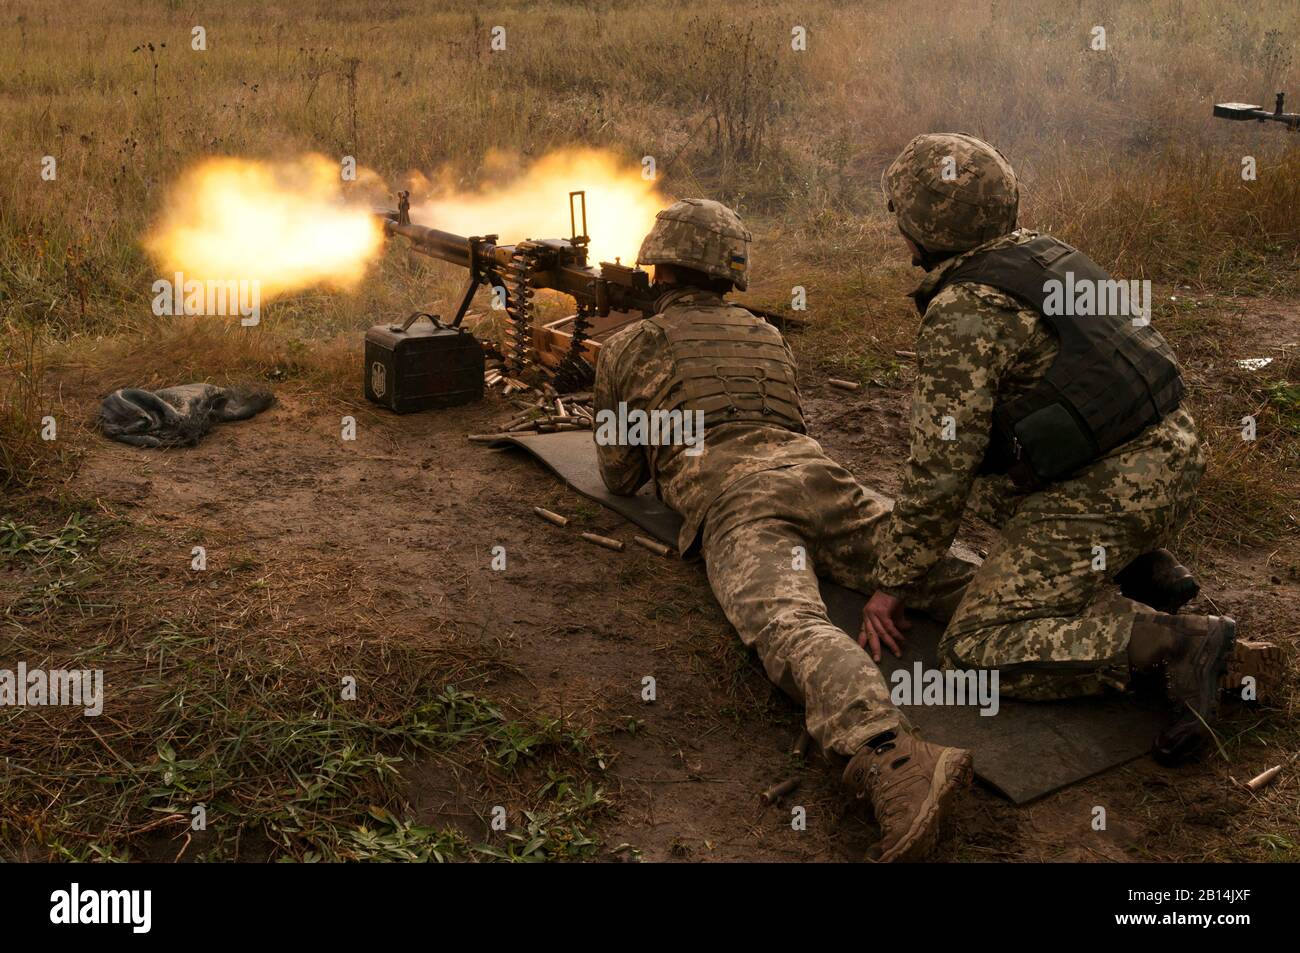 Ukrainian soldiers with the 1st Battalion, 95th Separate Airmobile Brigade train with a DShK 12.7 mm machine gun during a training cycle at the Yavoriv Combat Training Center on the International Peacekeeping and Security Center near Yavoriv, Ukraine, Sept. 6, 2017. Yavoriv CTC Observer Coach Trainers, along with mentors from the Polish army and the U.S. Army's 45th Infantry Brigade Combat Team, led the training for soldiers from the 1st Battalion, 95th Separate Airmobile Brigade during the battalion's rotation through the Yavoriv CTC. The 45th is deployed to Ukraine as part of the Joint Multi Stock Photo